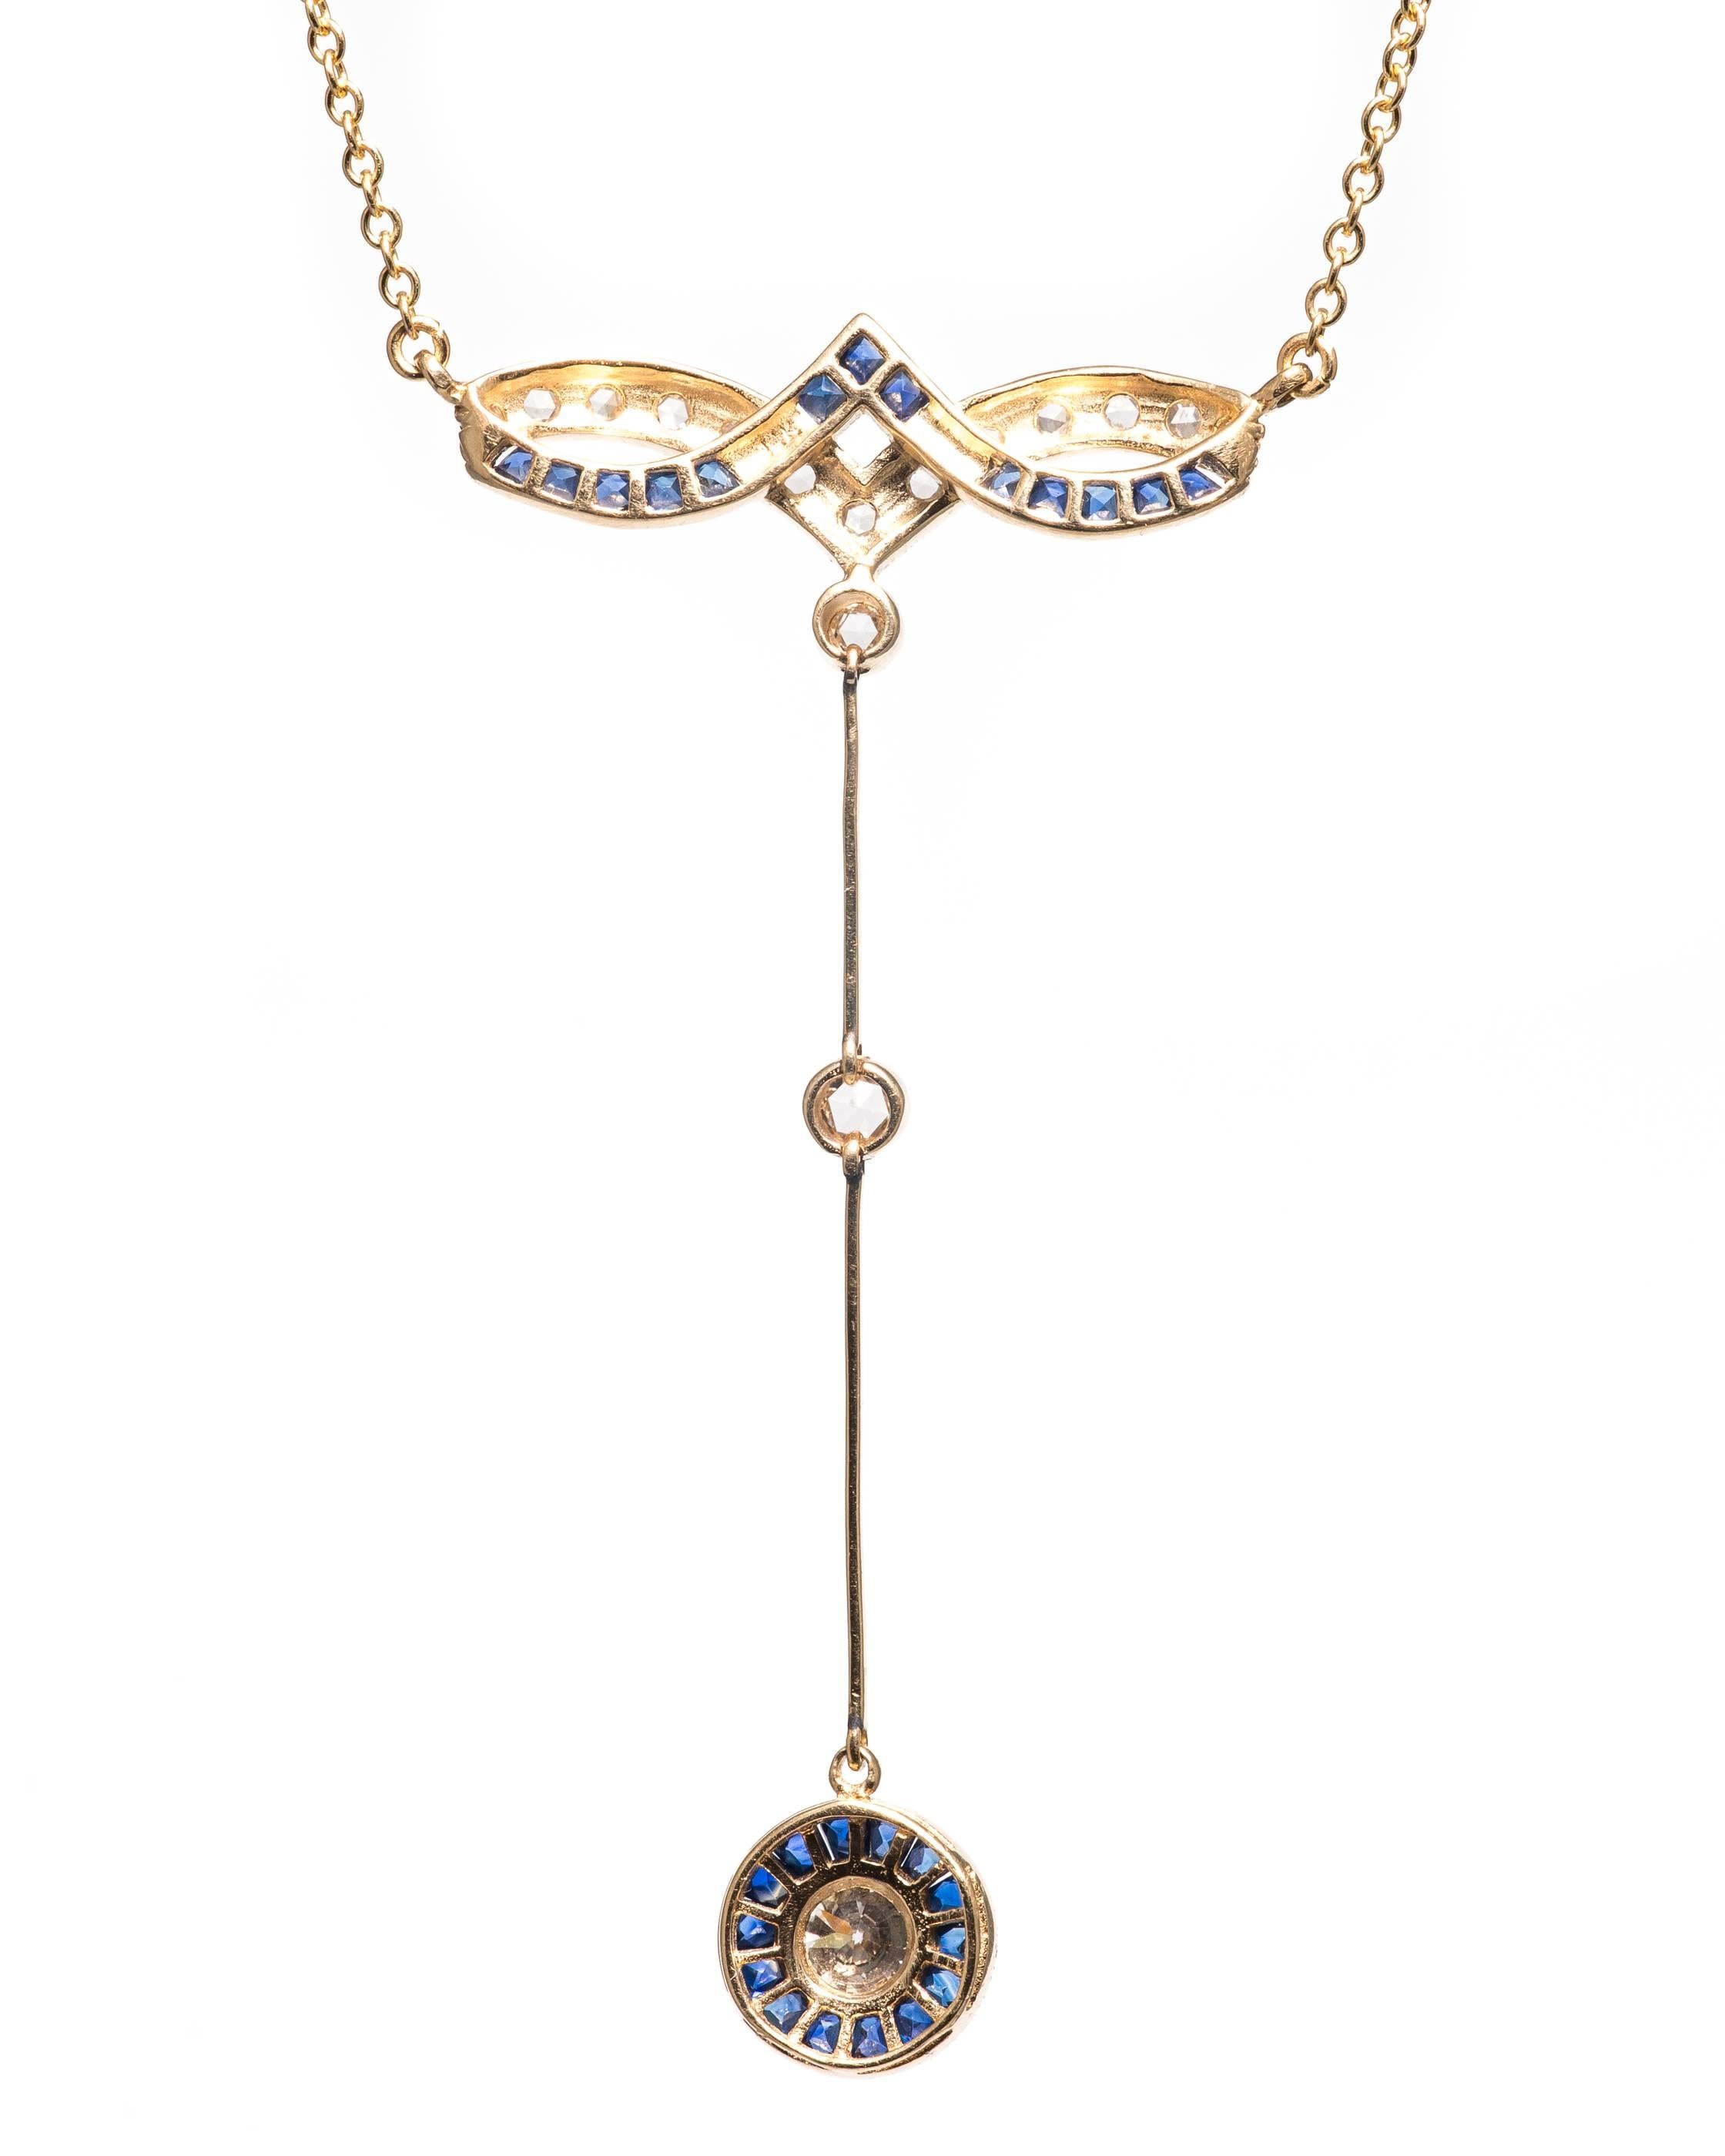 Exquisite French Cut Sapphire Diamond Yellow Gold Drop Necklace For Sale 1